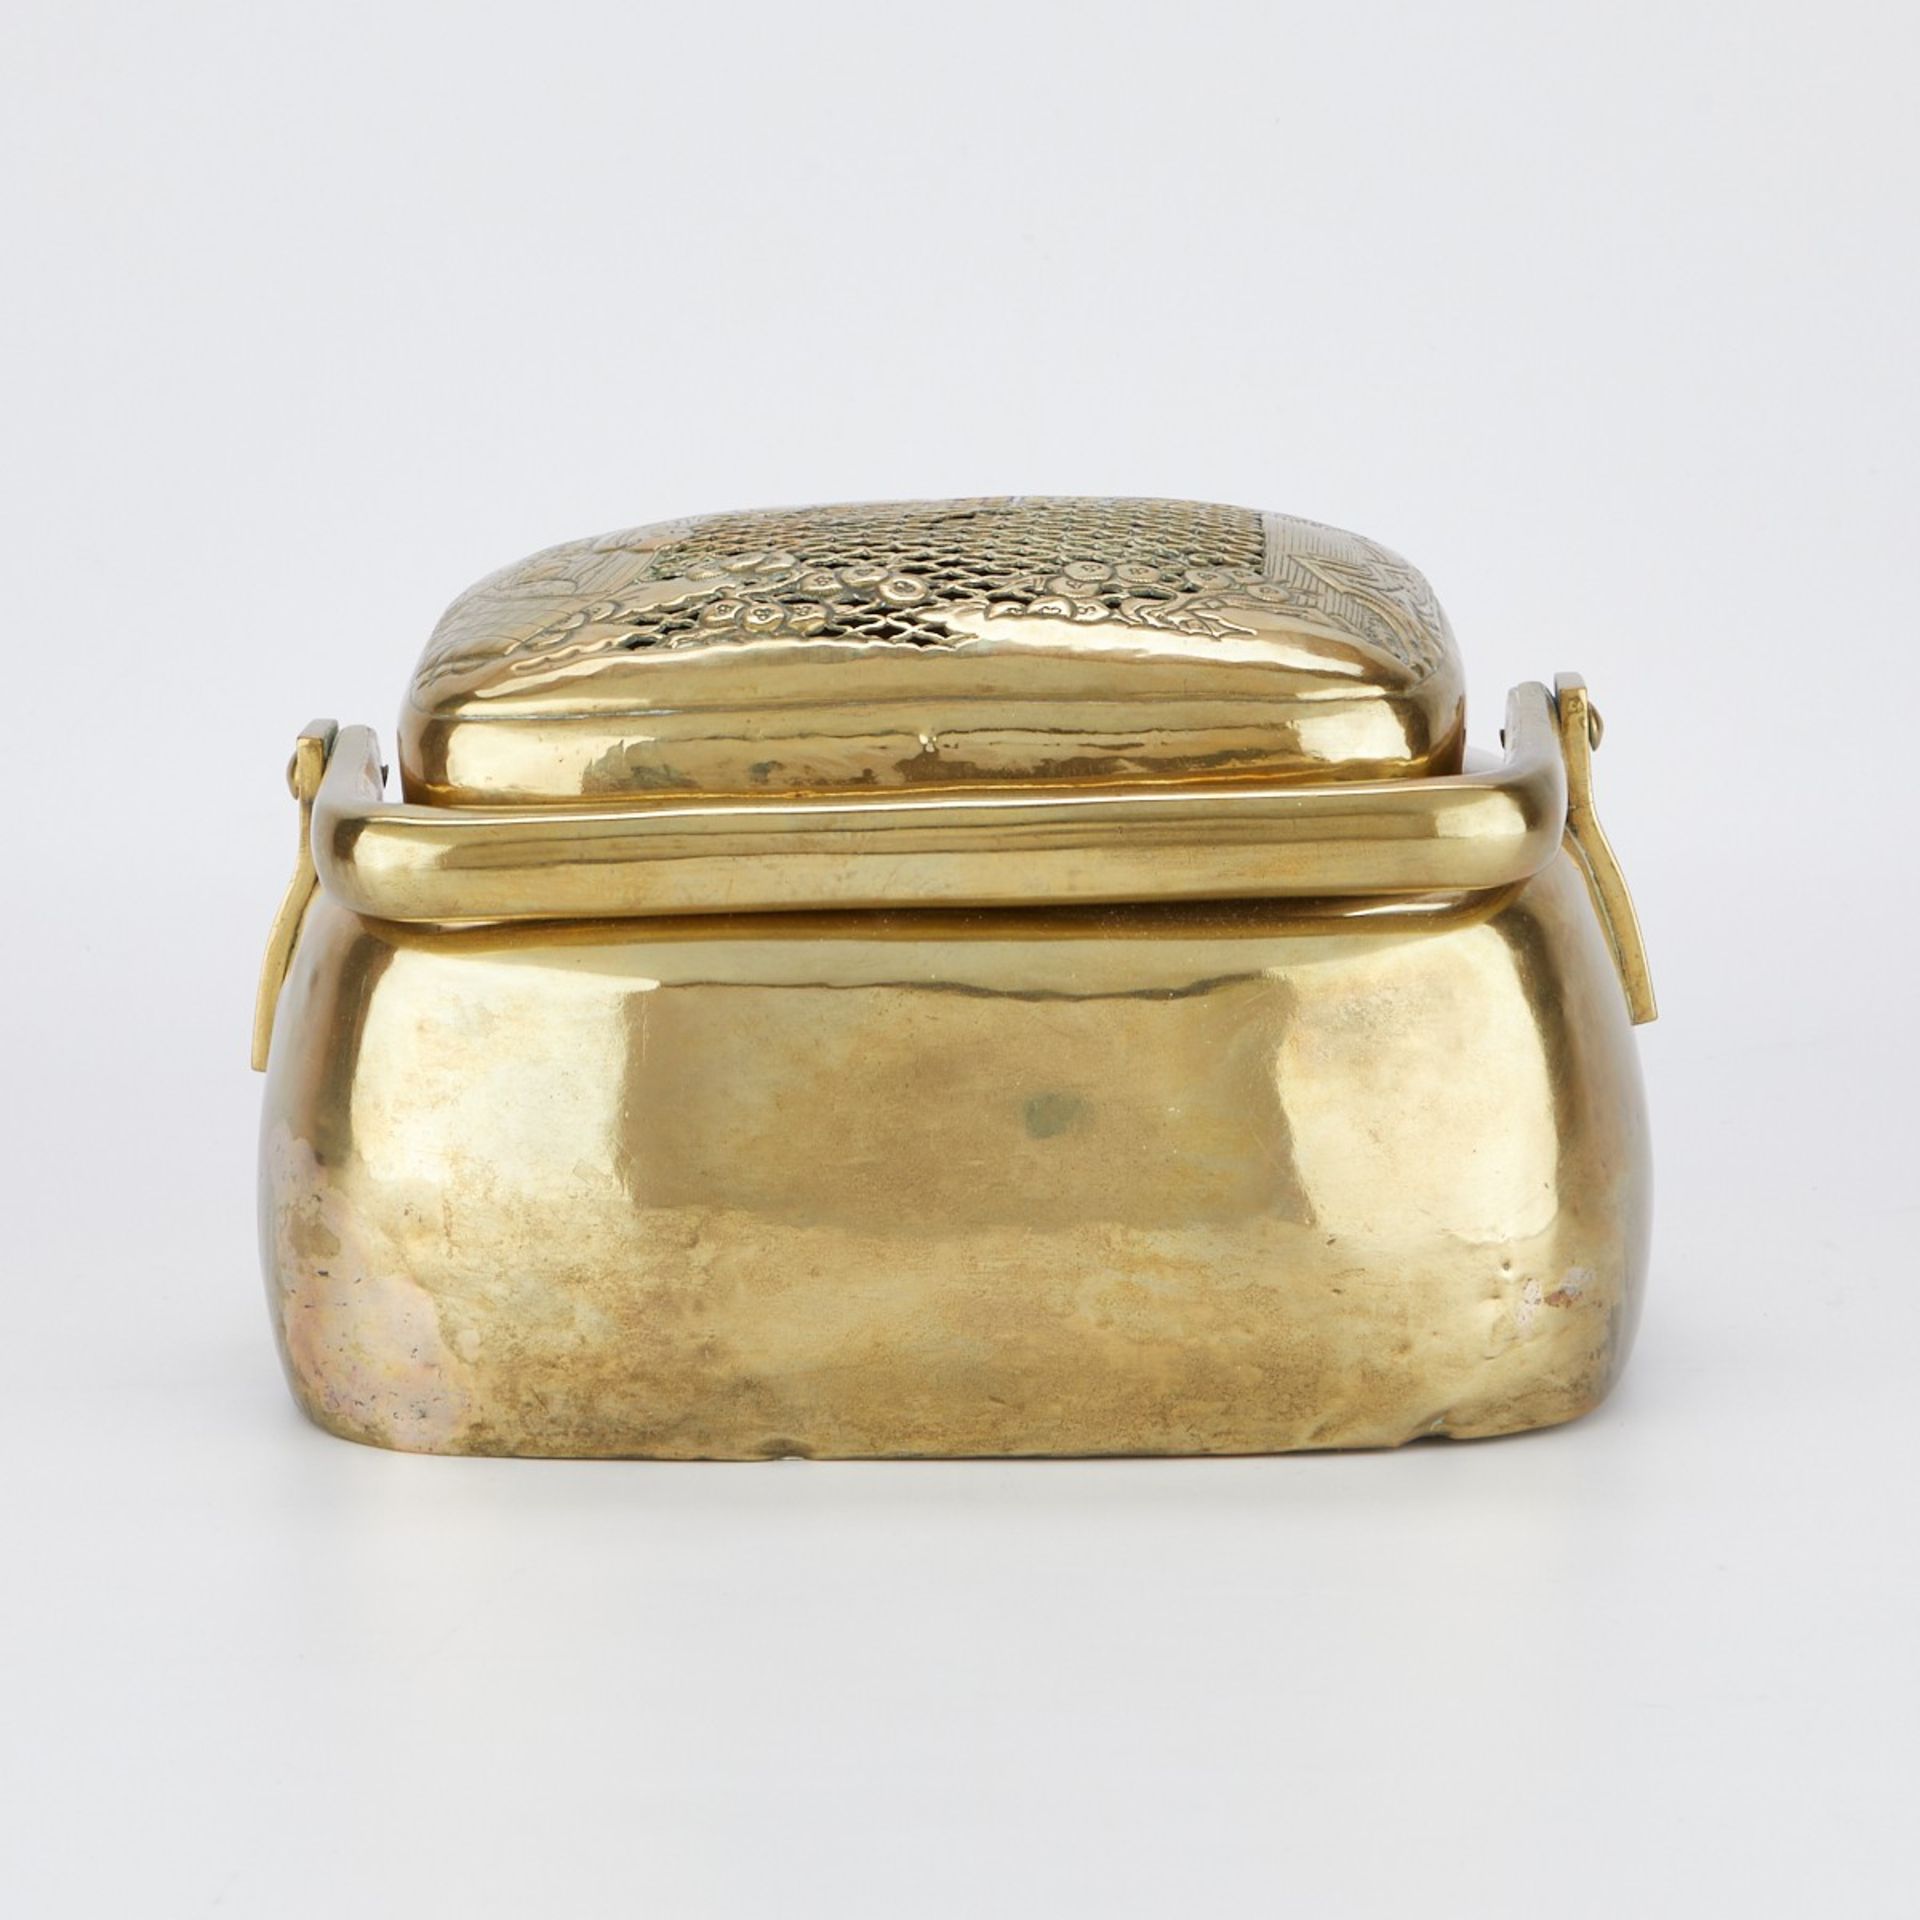 Lrg Chinese Qing Brass Hand Foot Warmer - Image 4 of 8